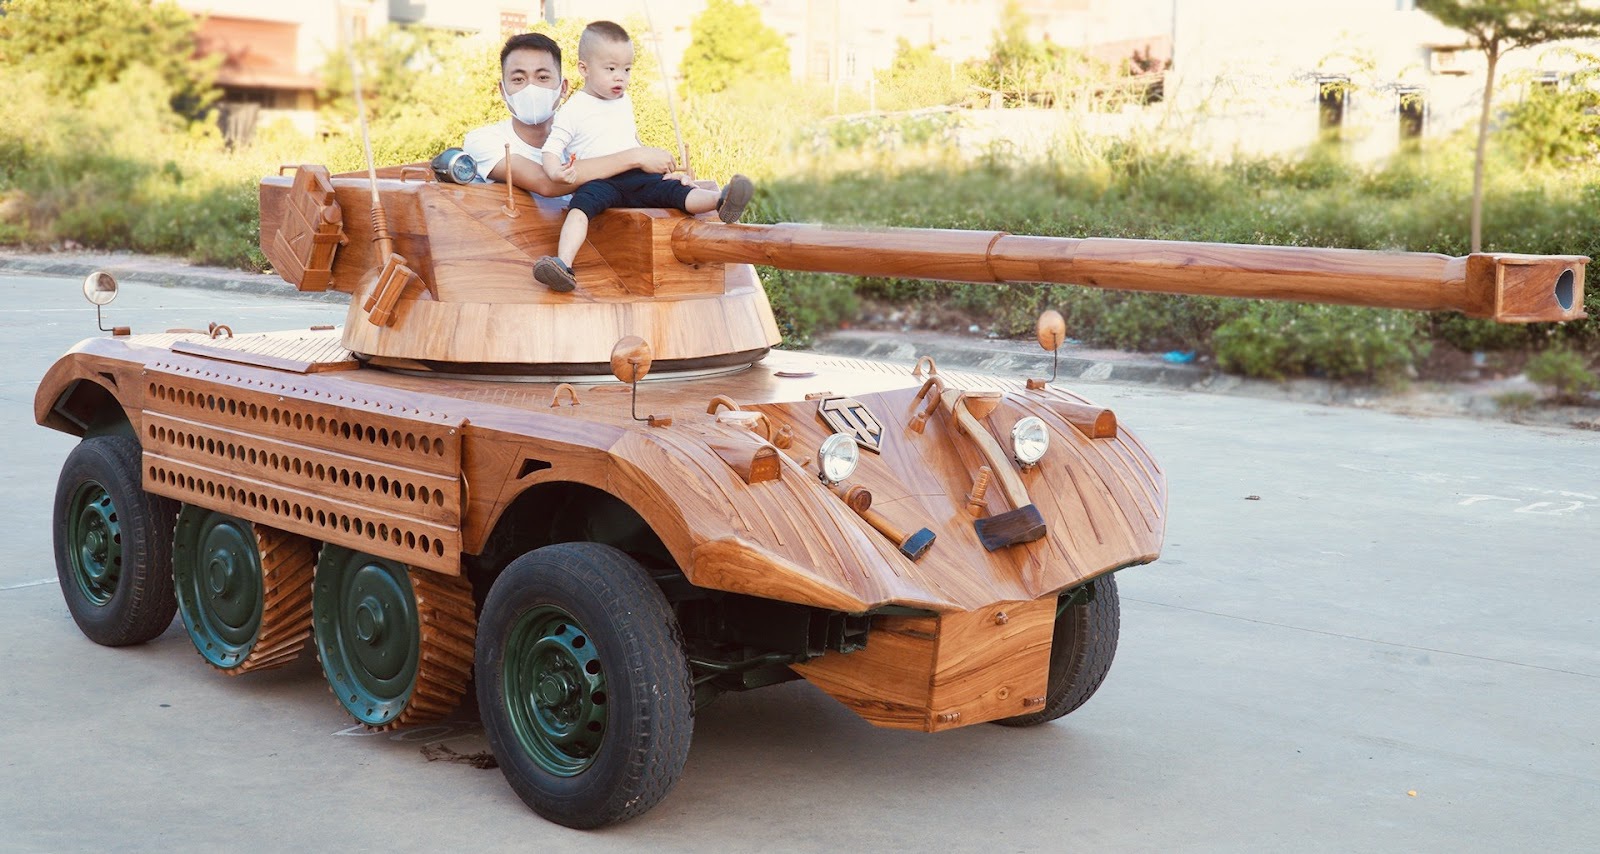 The father in Bac Ninh spent 200 million dong turning an old car into a unique tank - 4